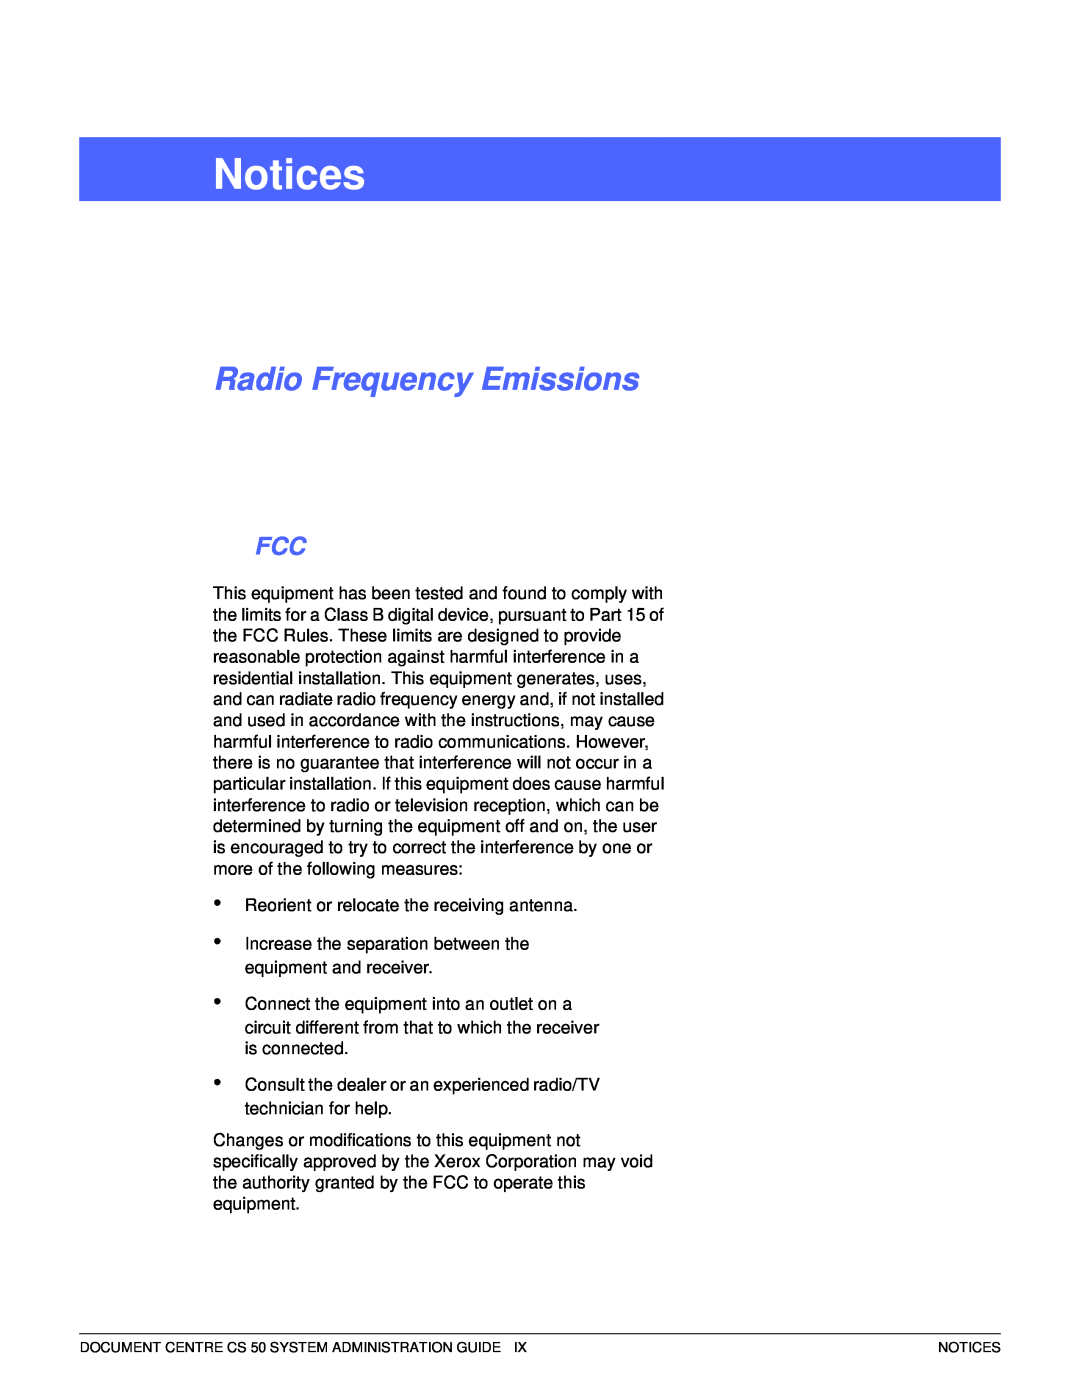 Xerox 50 manual Notices, Radio Frequency Emissions 